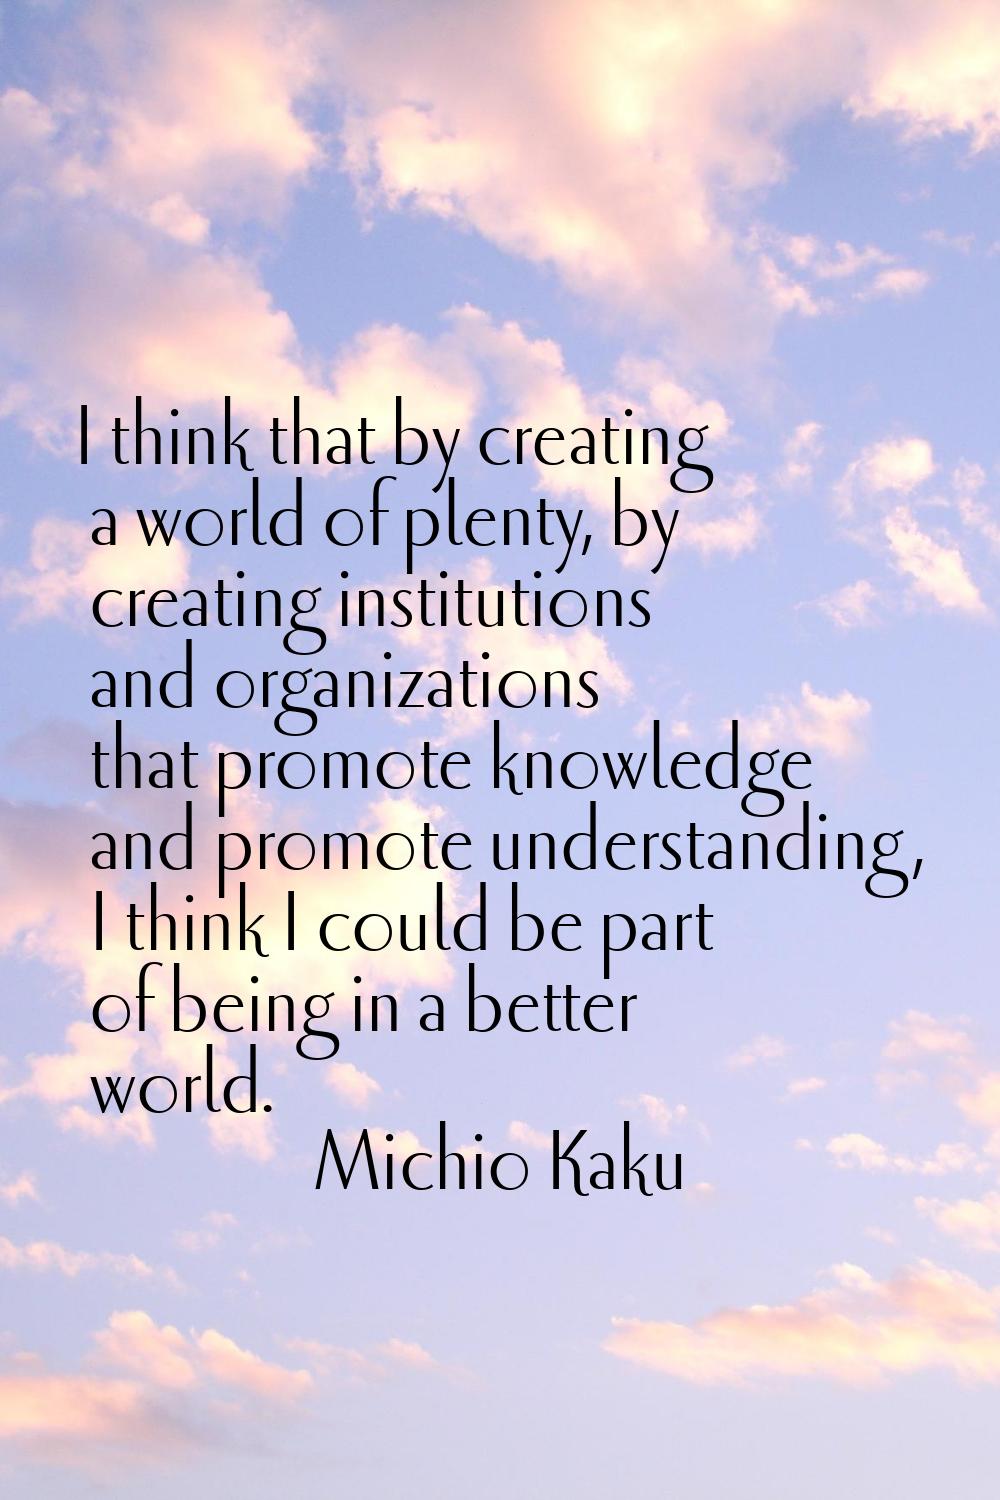 I think that by creating a world of plenty, by creating institutions and organizations that promote